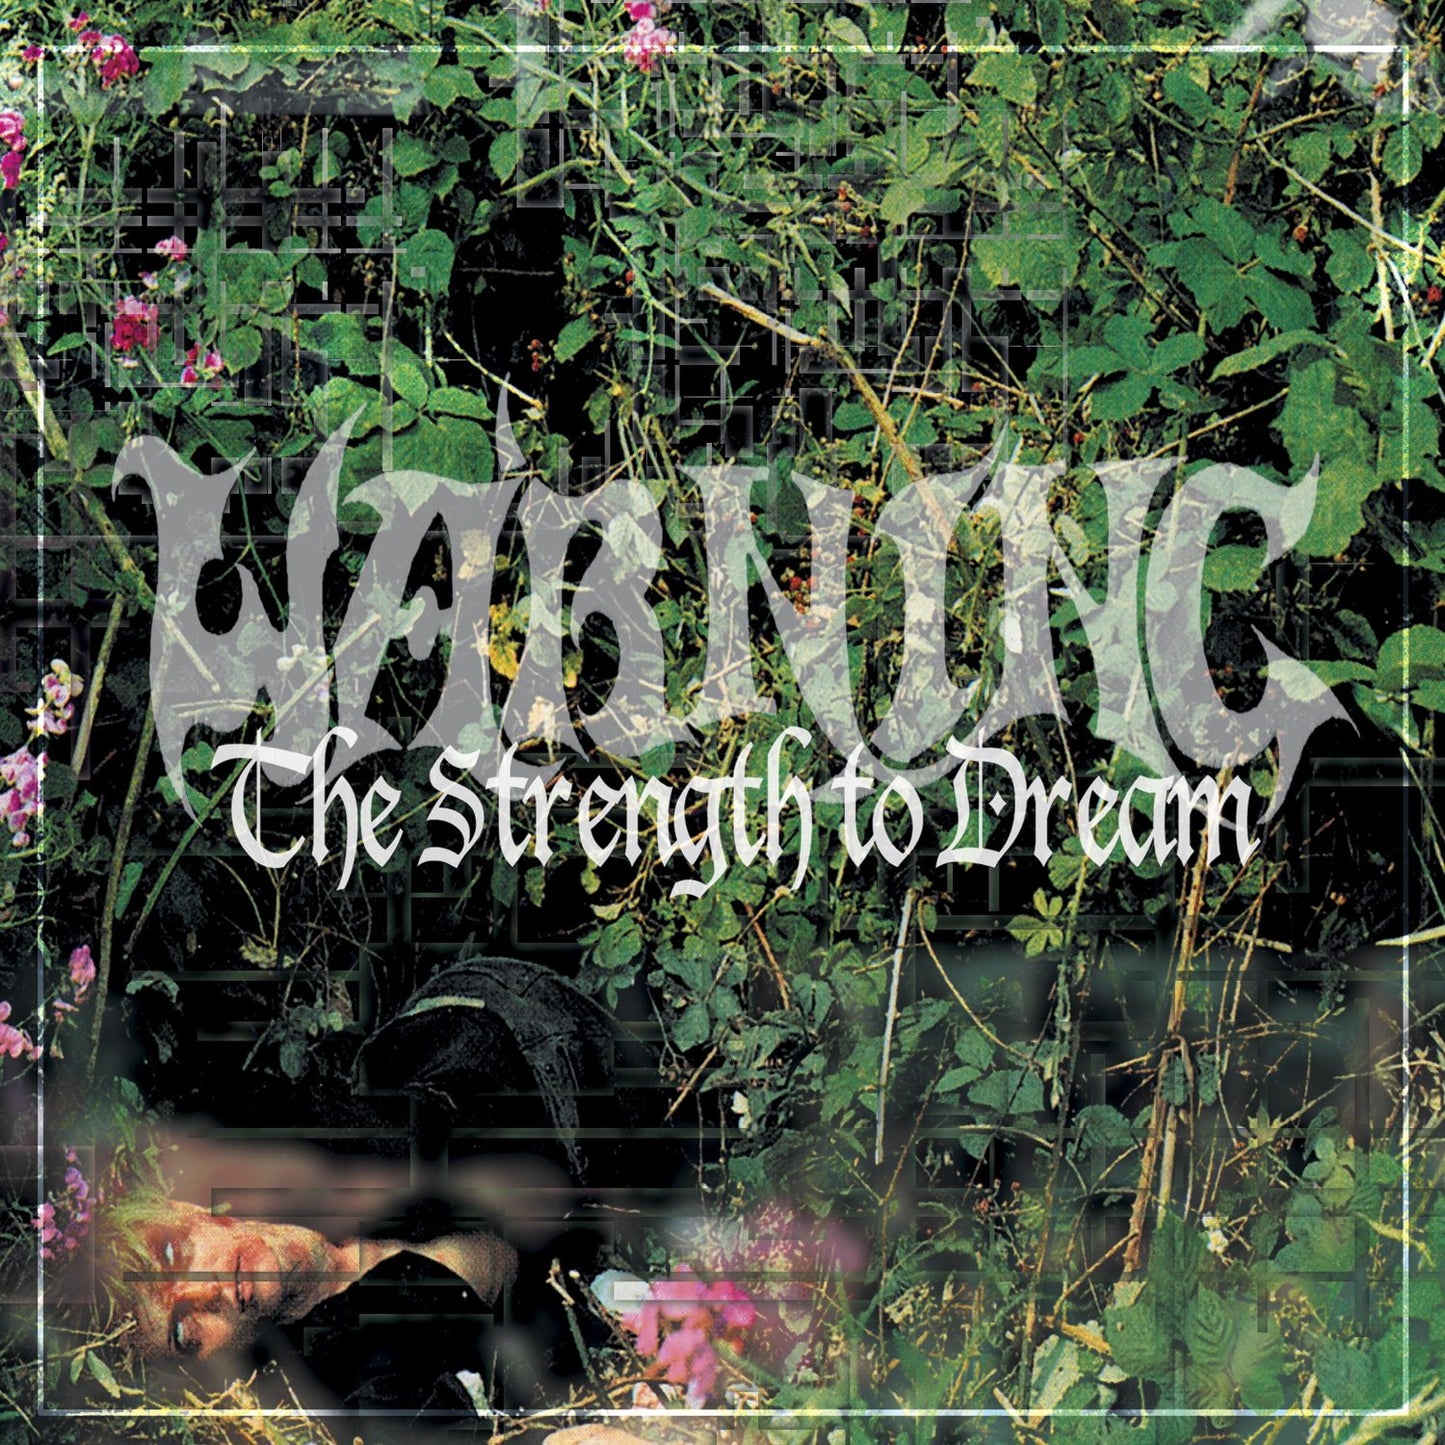 Warning - The Strength to Dream